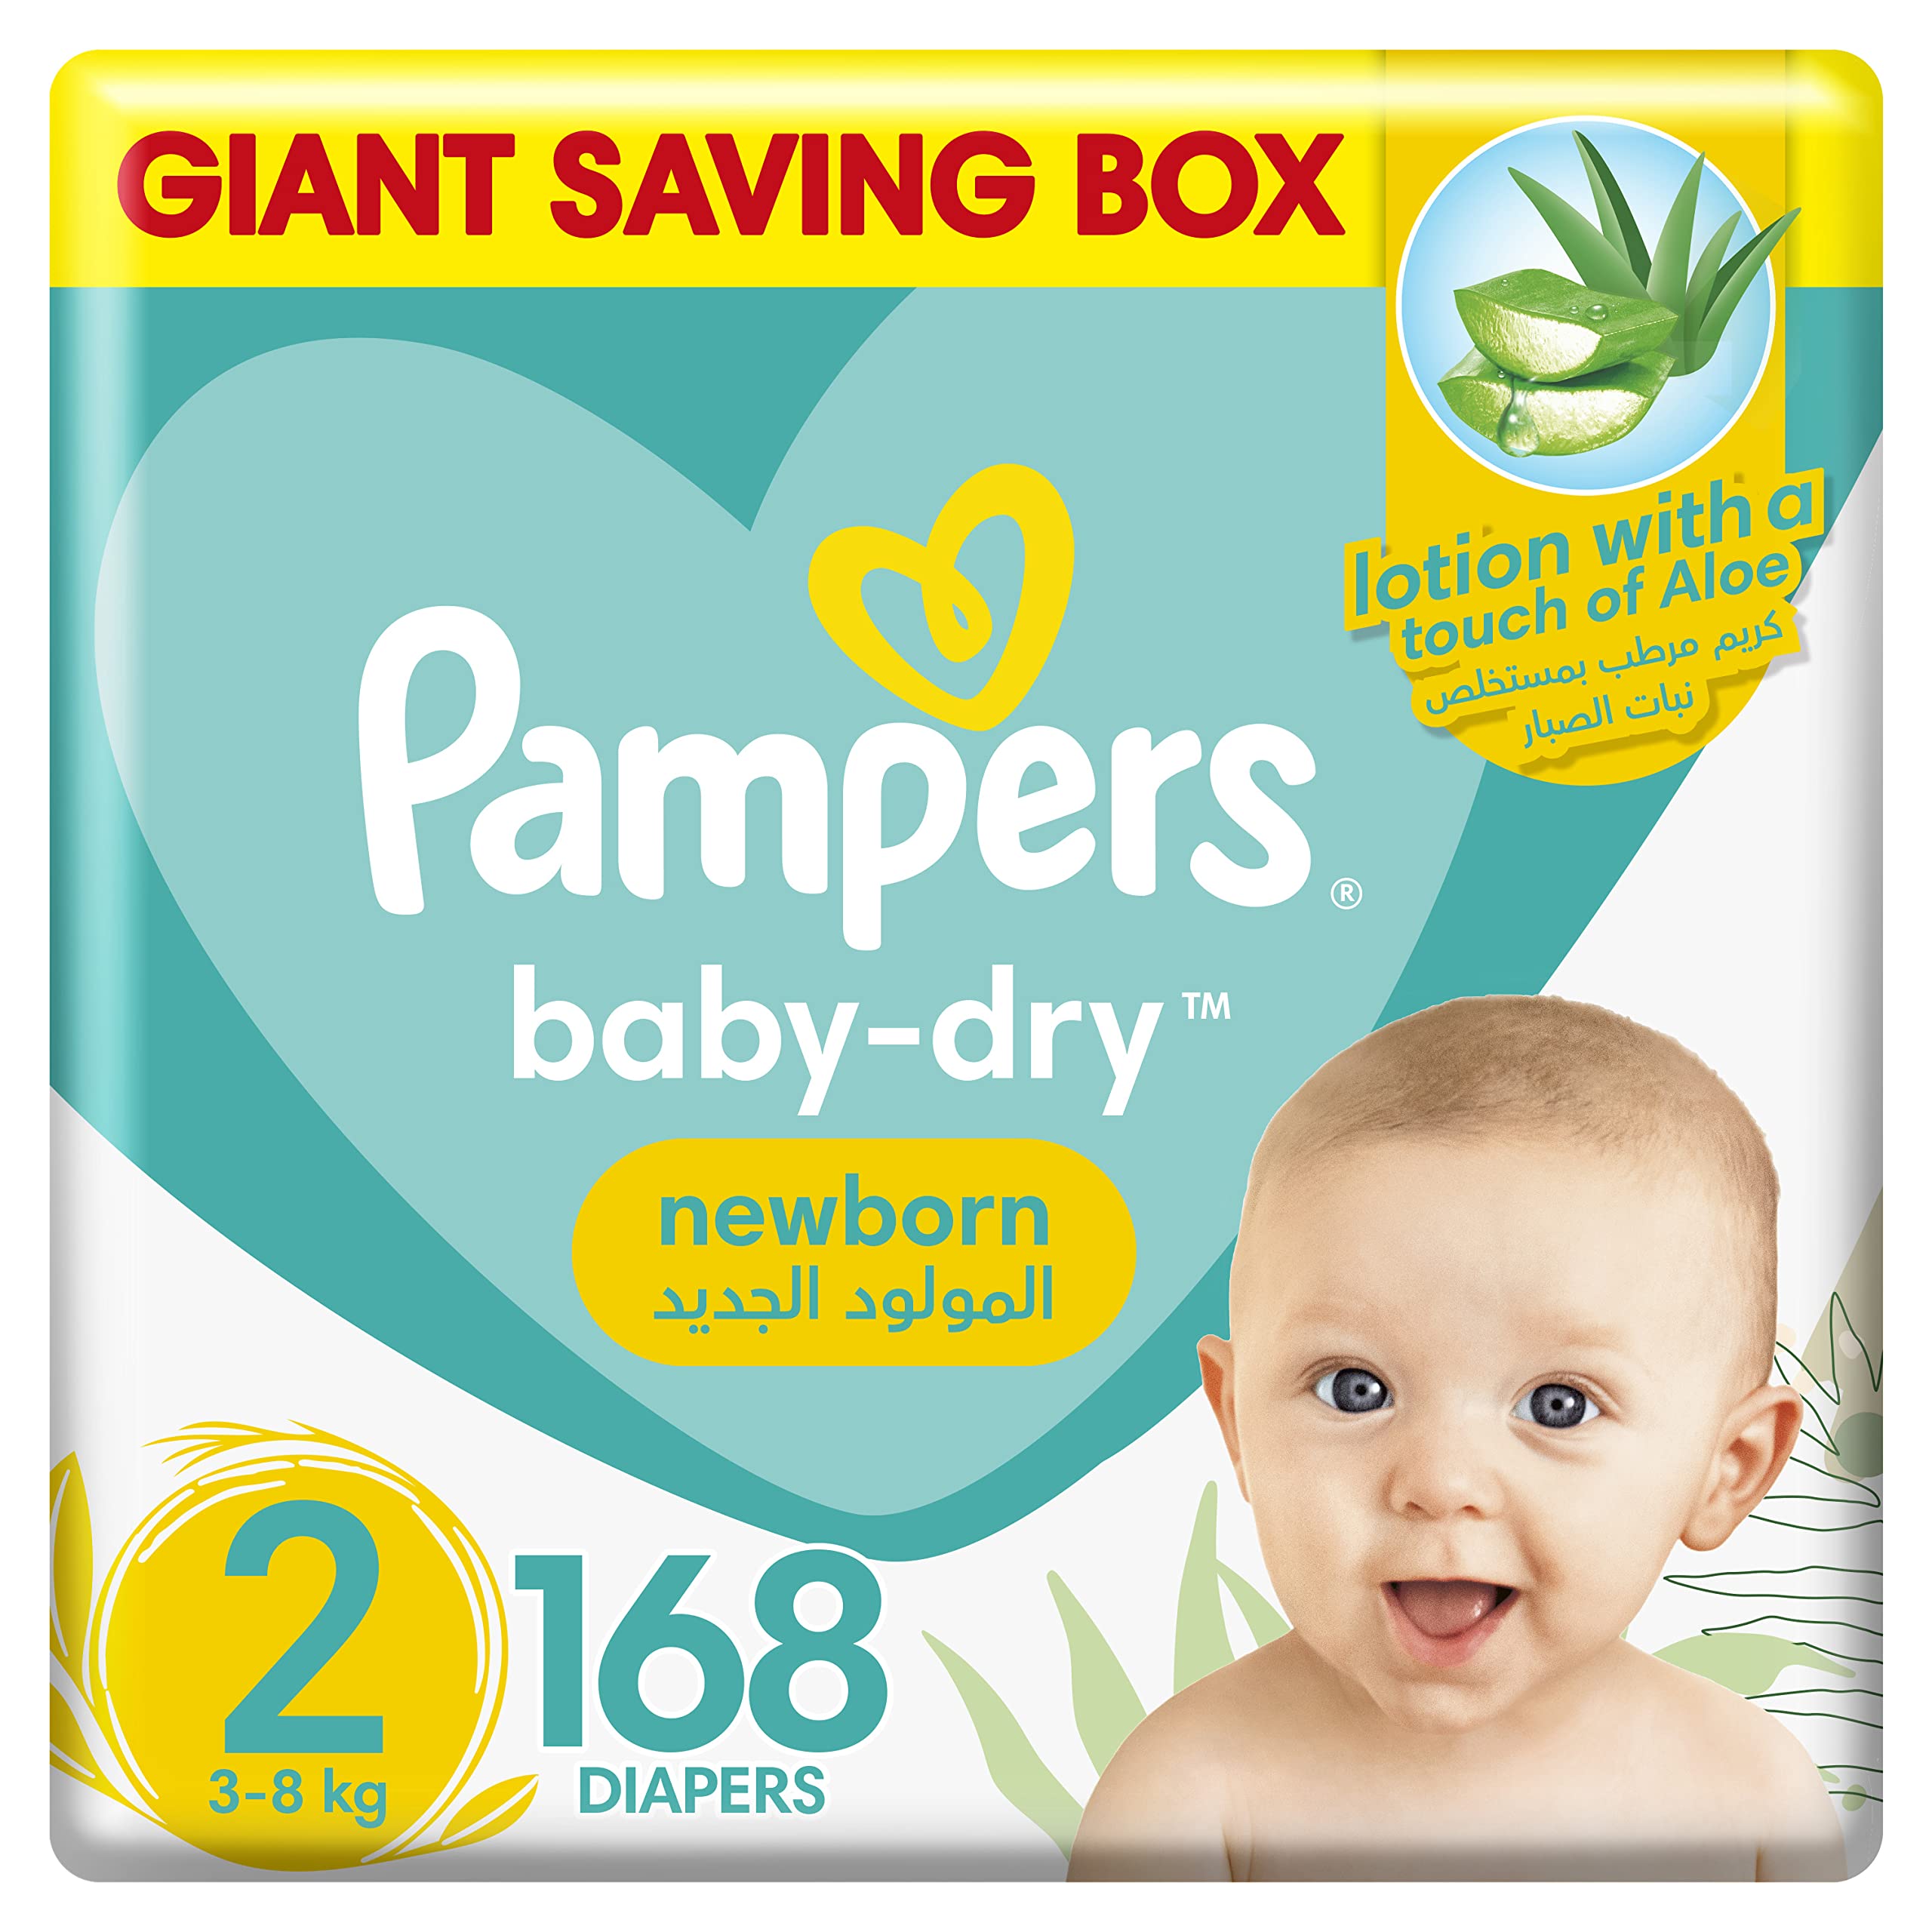 Pampers Baby-Dry Newborn Diapers with Aloe Vera Lotion, Wetness Indicator, and Leakage Protection, Size 2, 3-8 kg, Jumbo Pack, 168 Diapers حفاضات بامبرز نيو بيبي دراي، مقاس 2 168 حفاضة